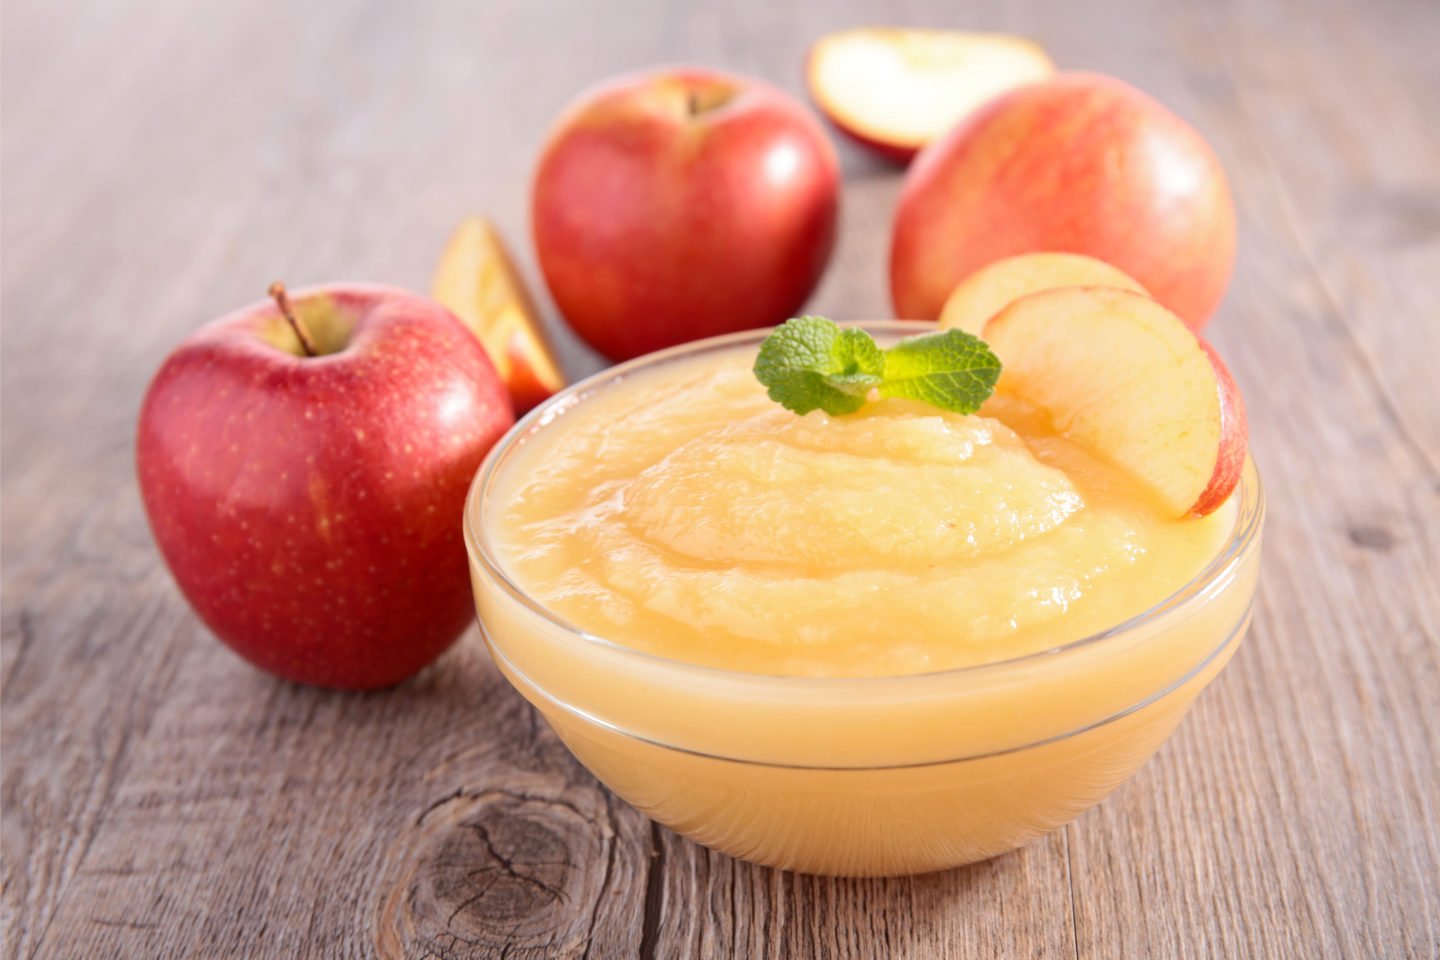 Apple Sauce In Transparent Bowl With Fresh Apples